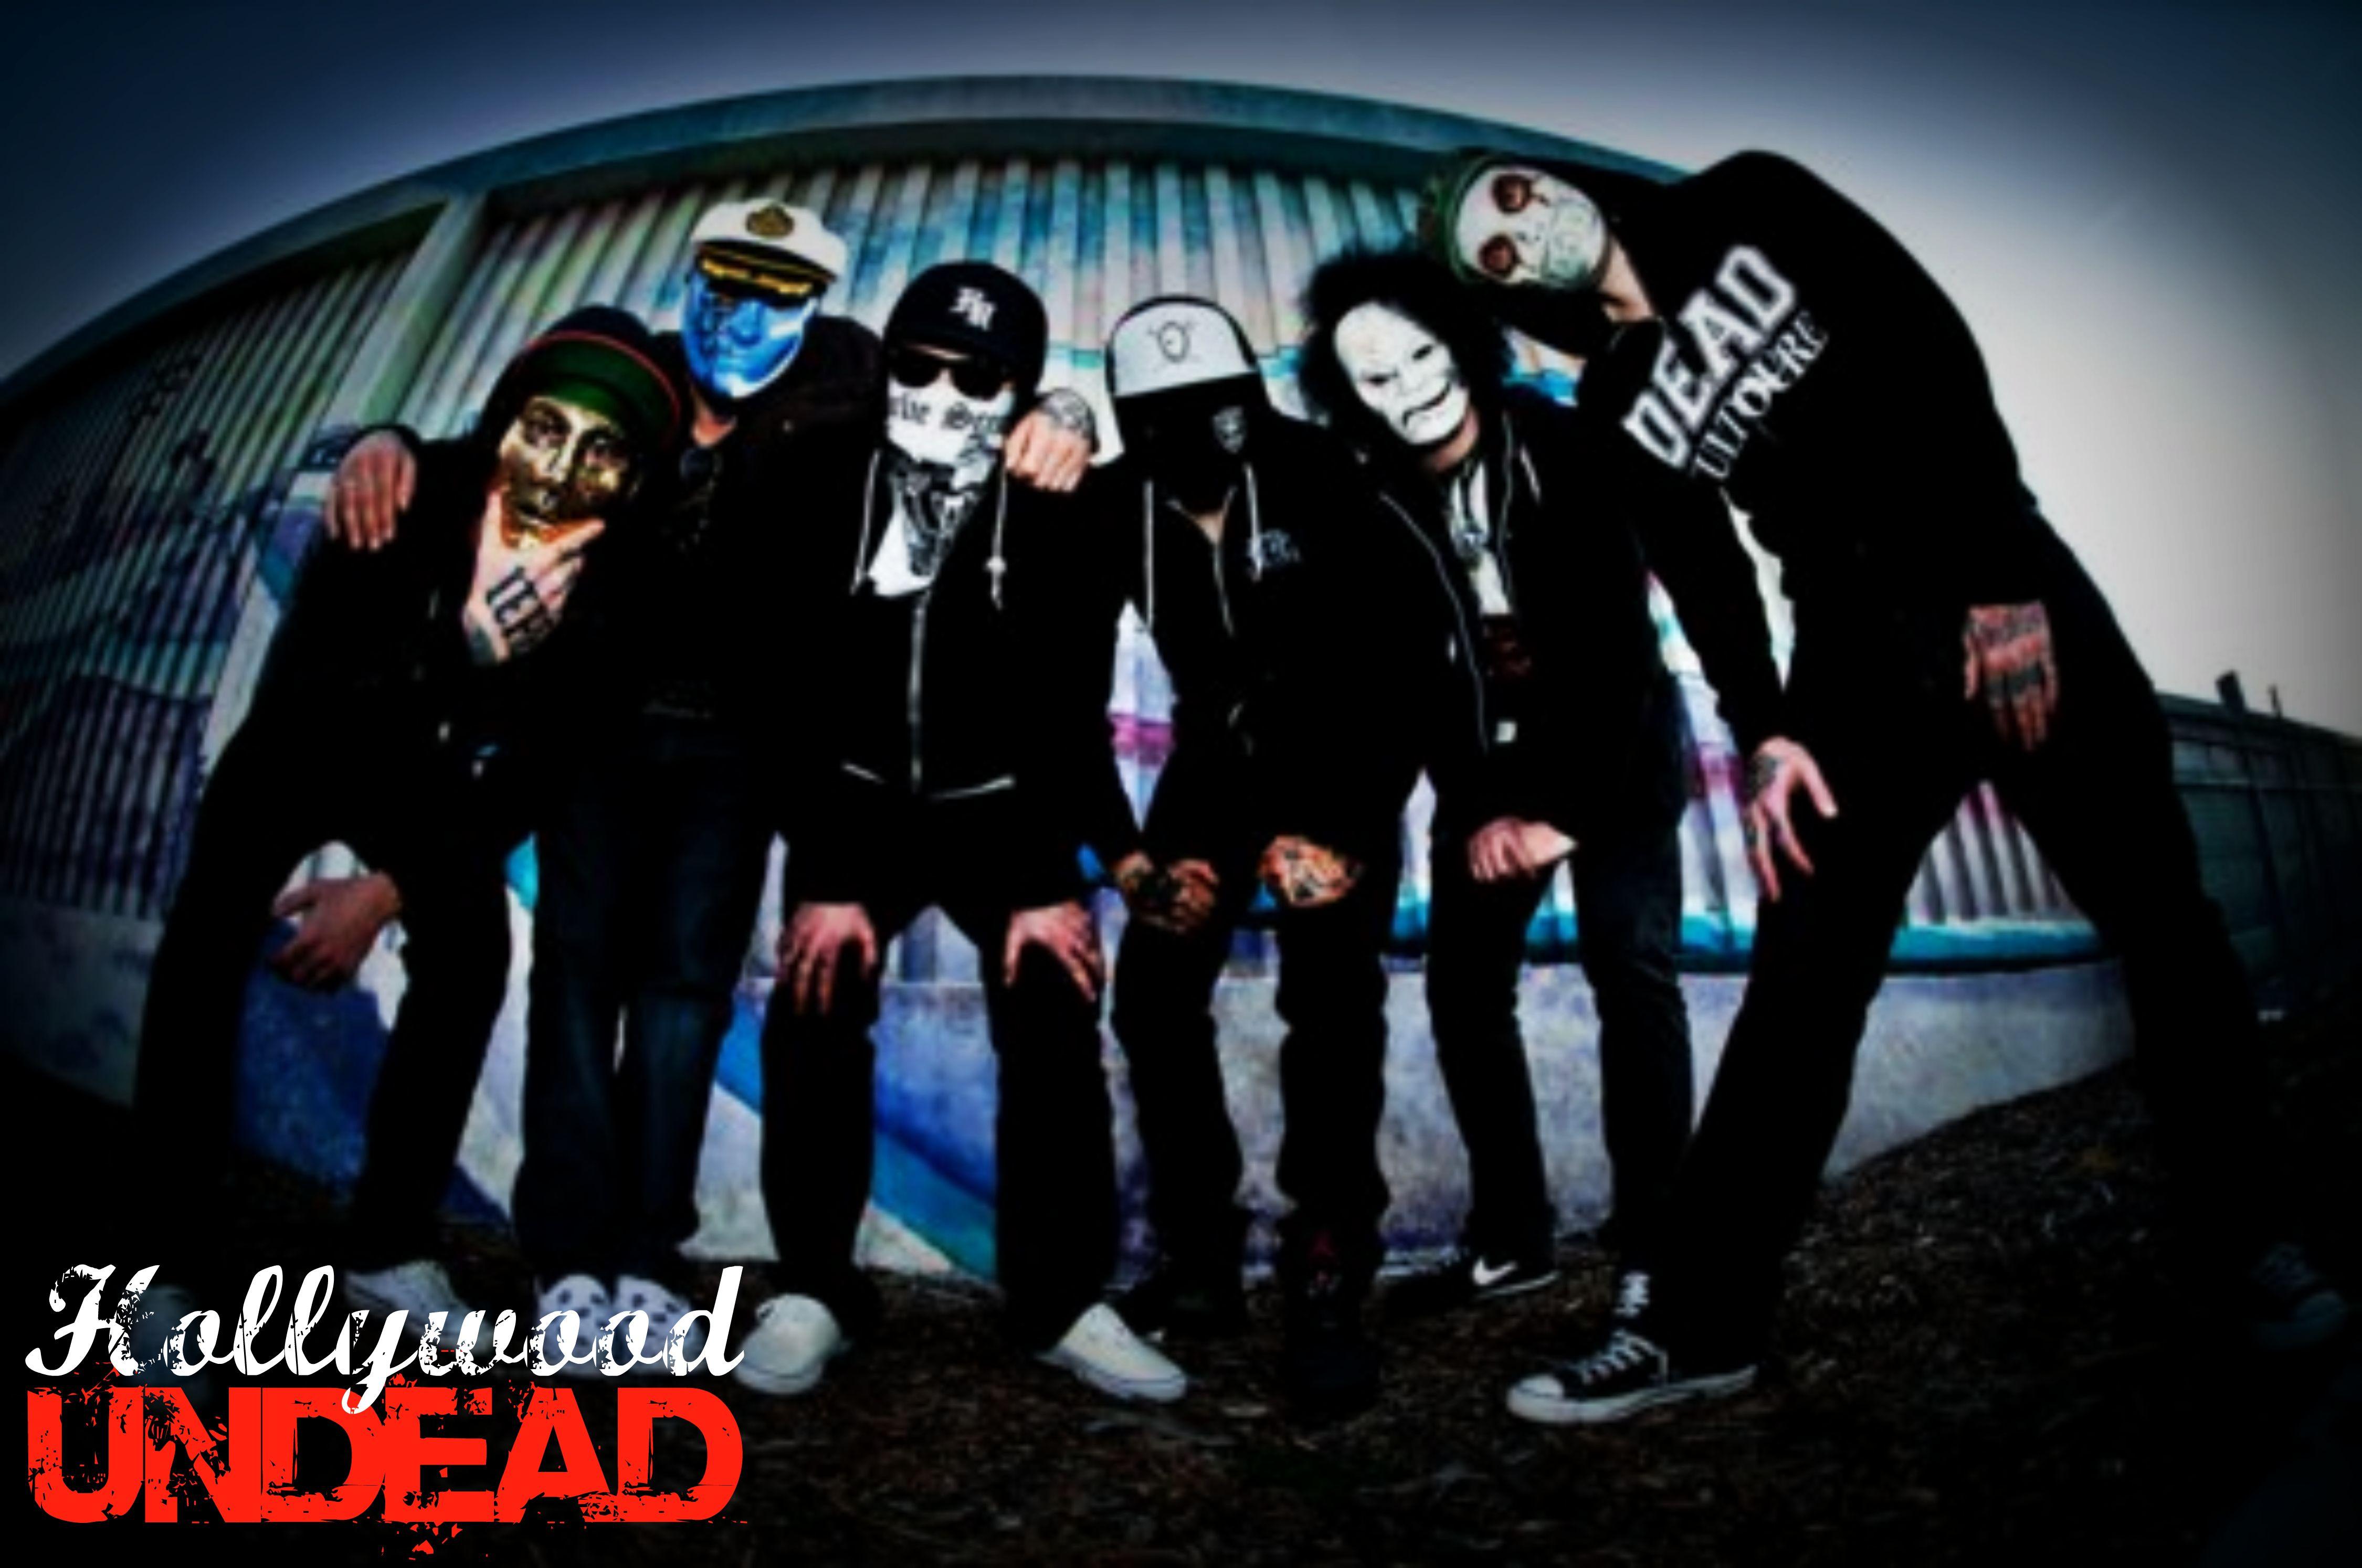 Wallpaper.wiki Hollywood Undead HD Wallpaper PIC WPE003642